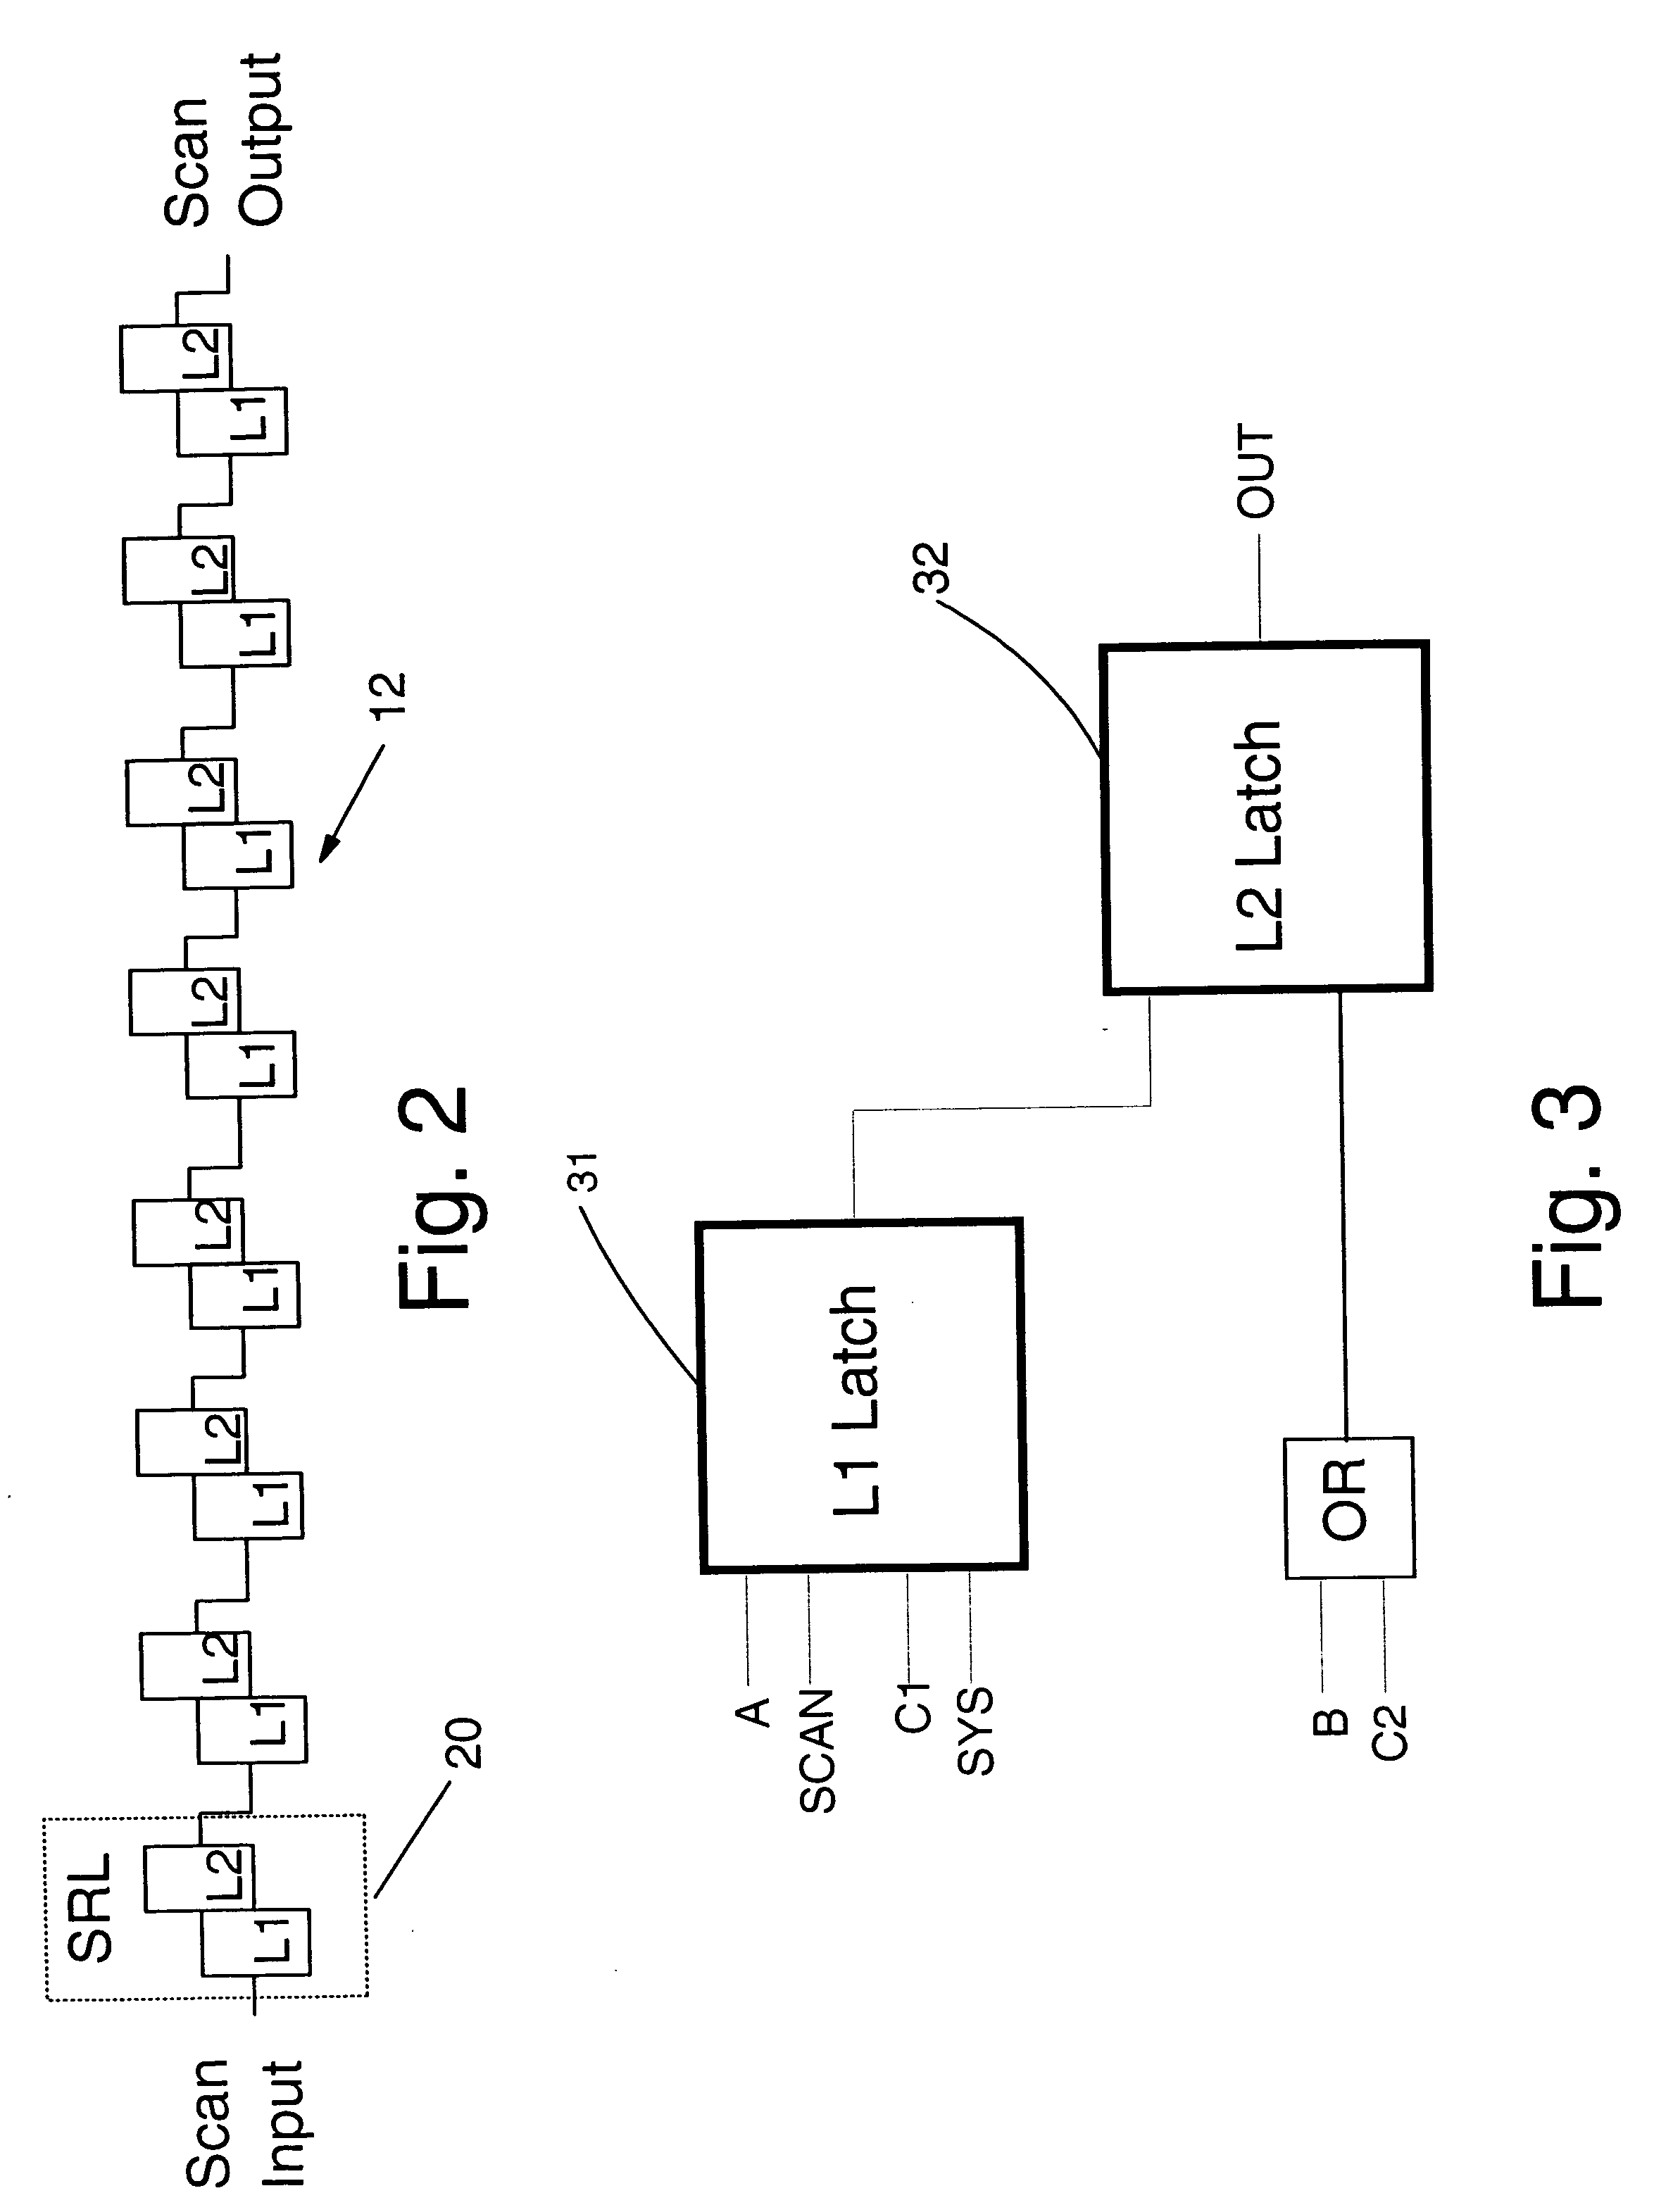 Method and apparatus for selective scan chain diagnostics